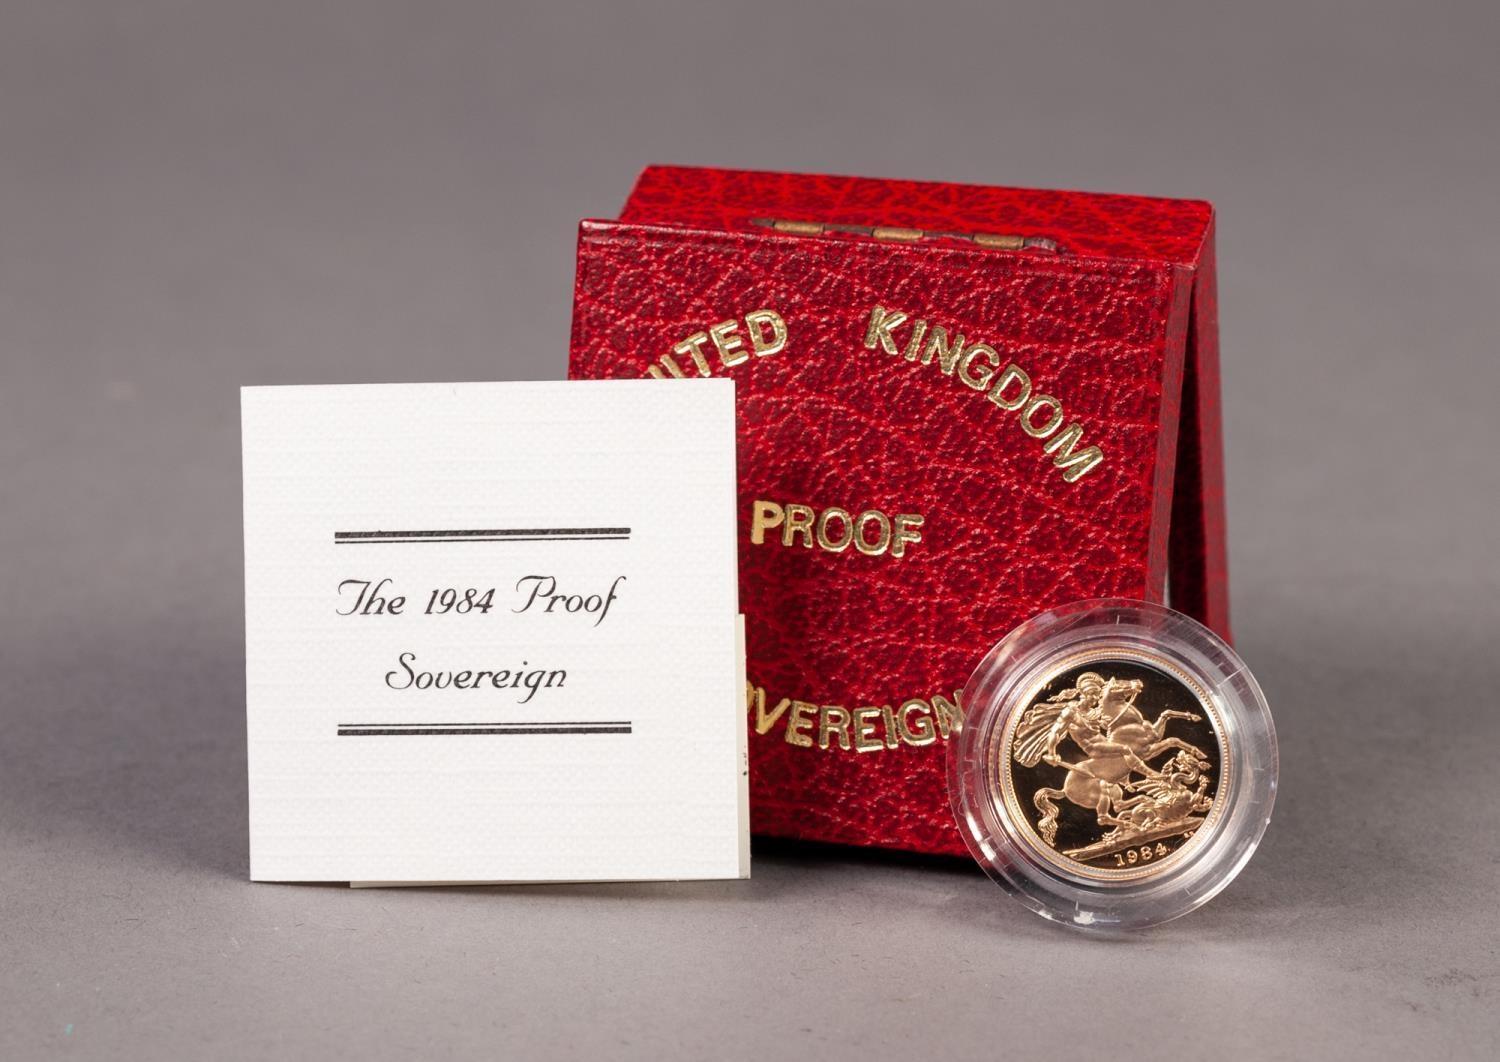 ROYAL MINT CASED AND ENCAPSULATED ELIZABETH II GOLD PROOF SOVEREIGN 1984 (VF)in hard red case with